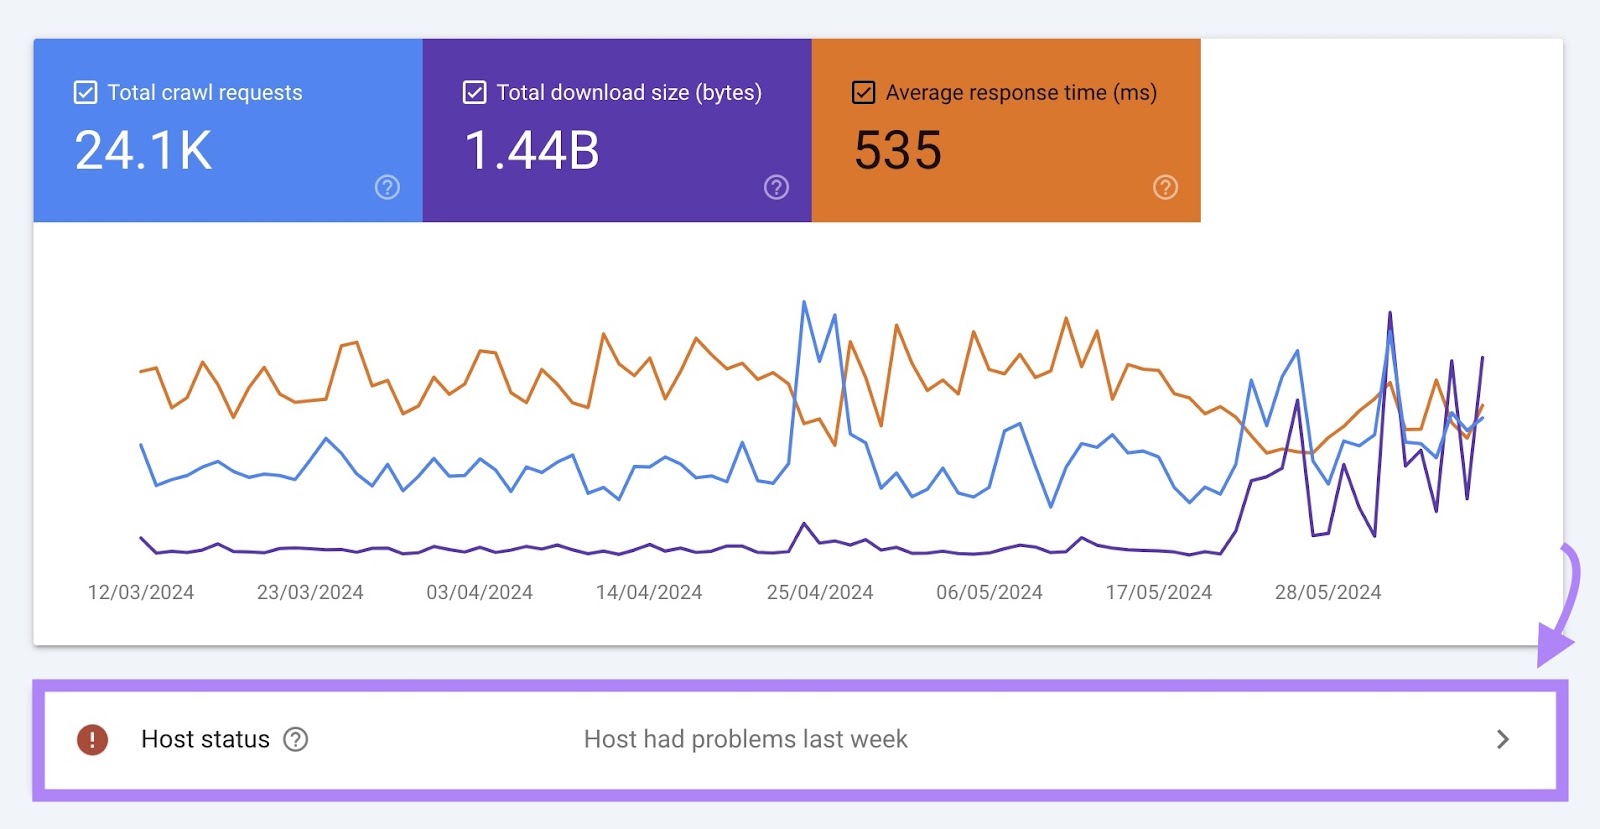 Host status on Google Search Console showing "Host had problems last week".